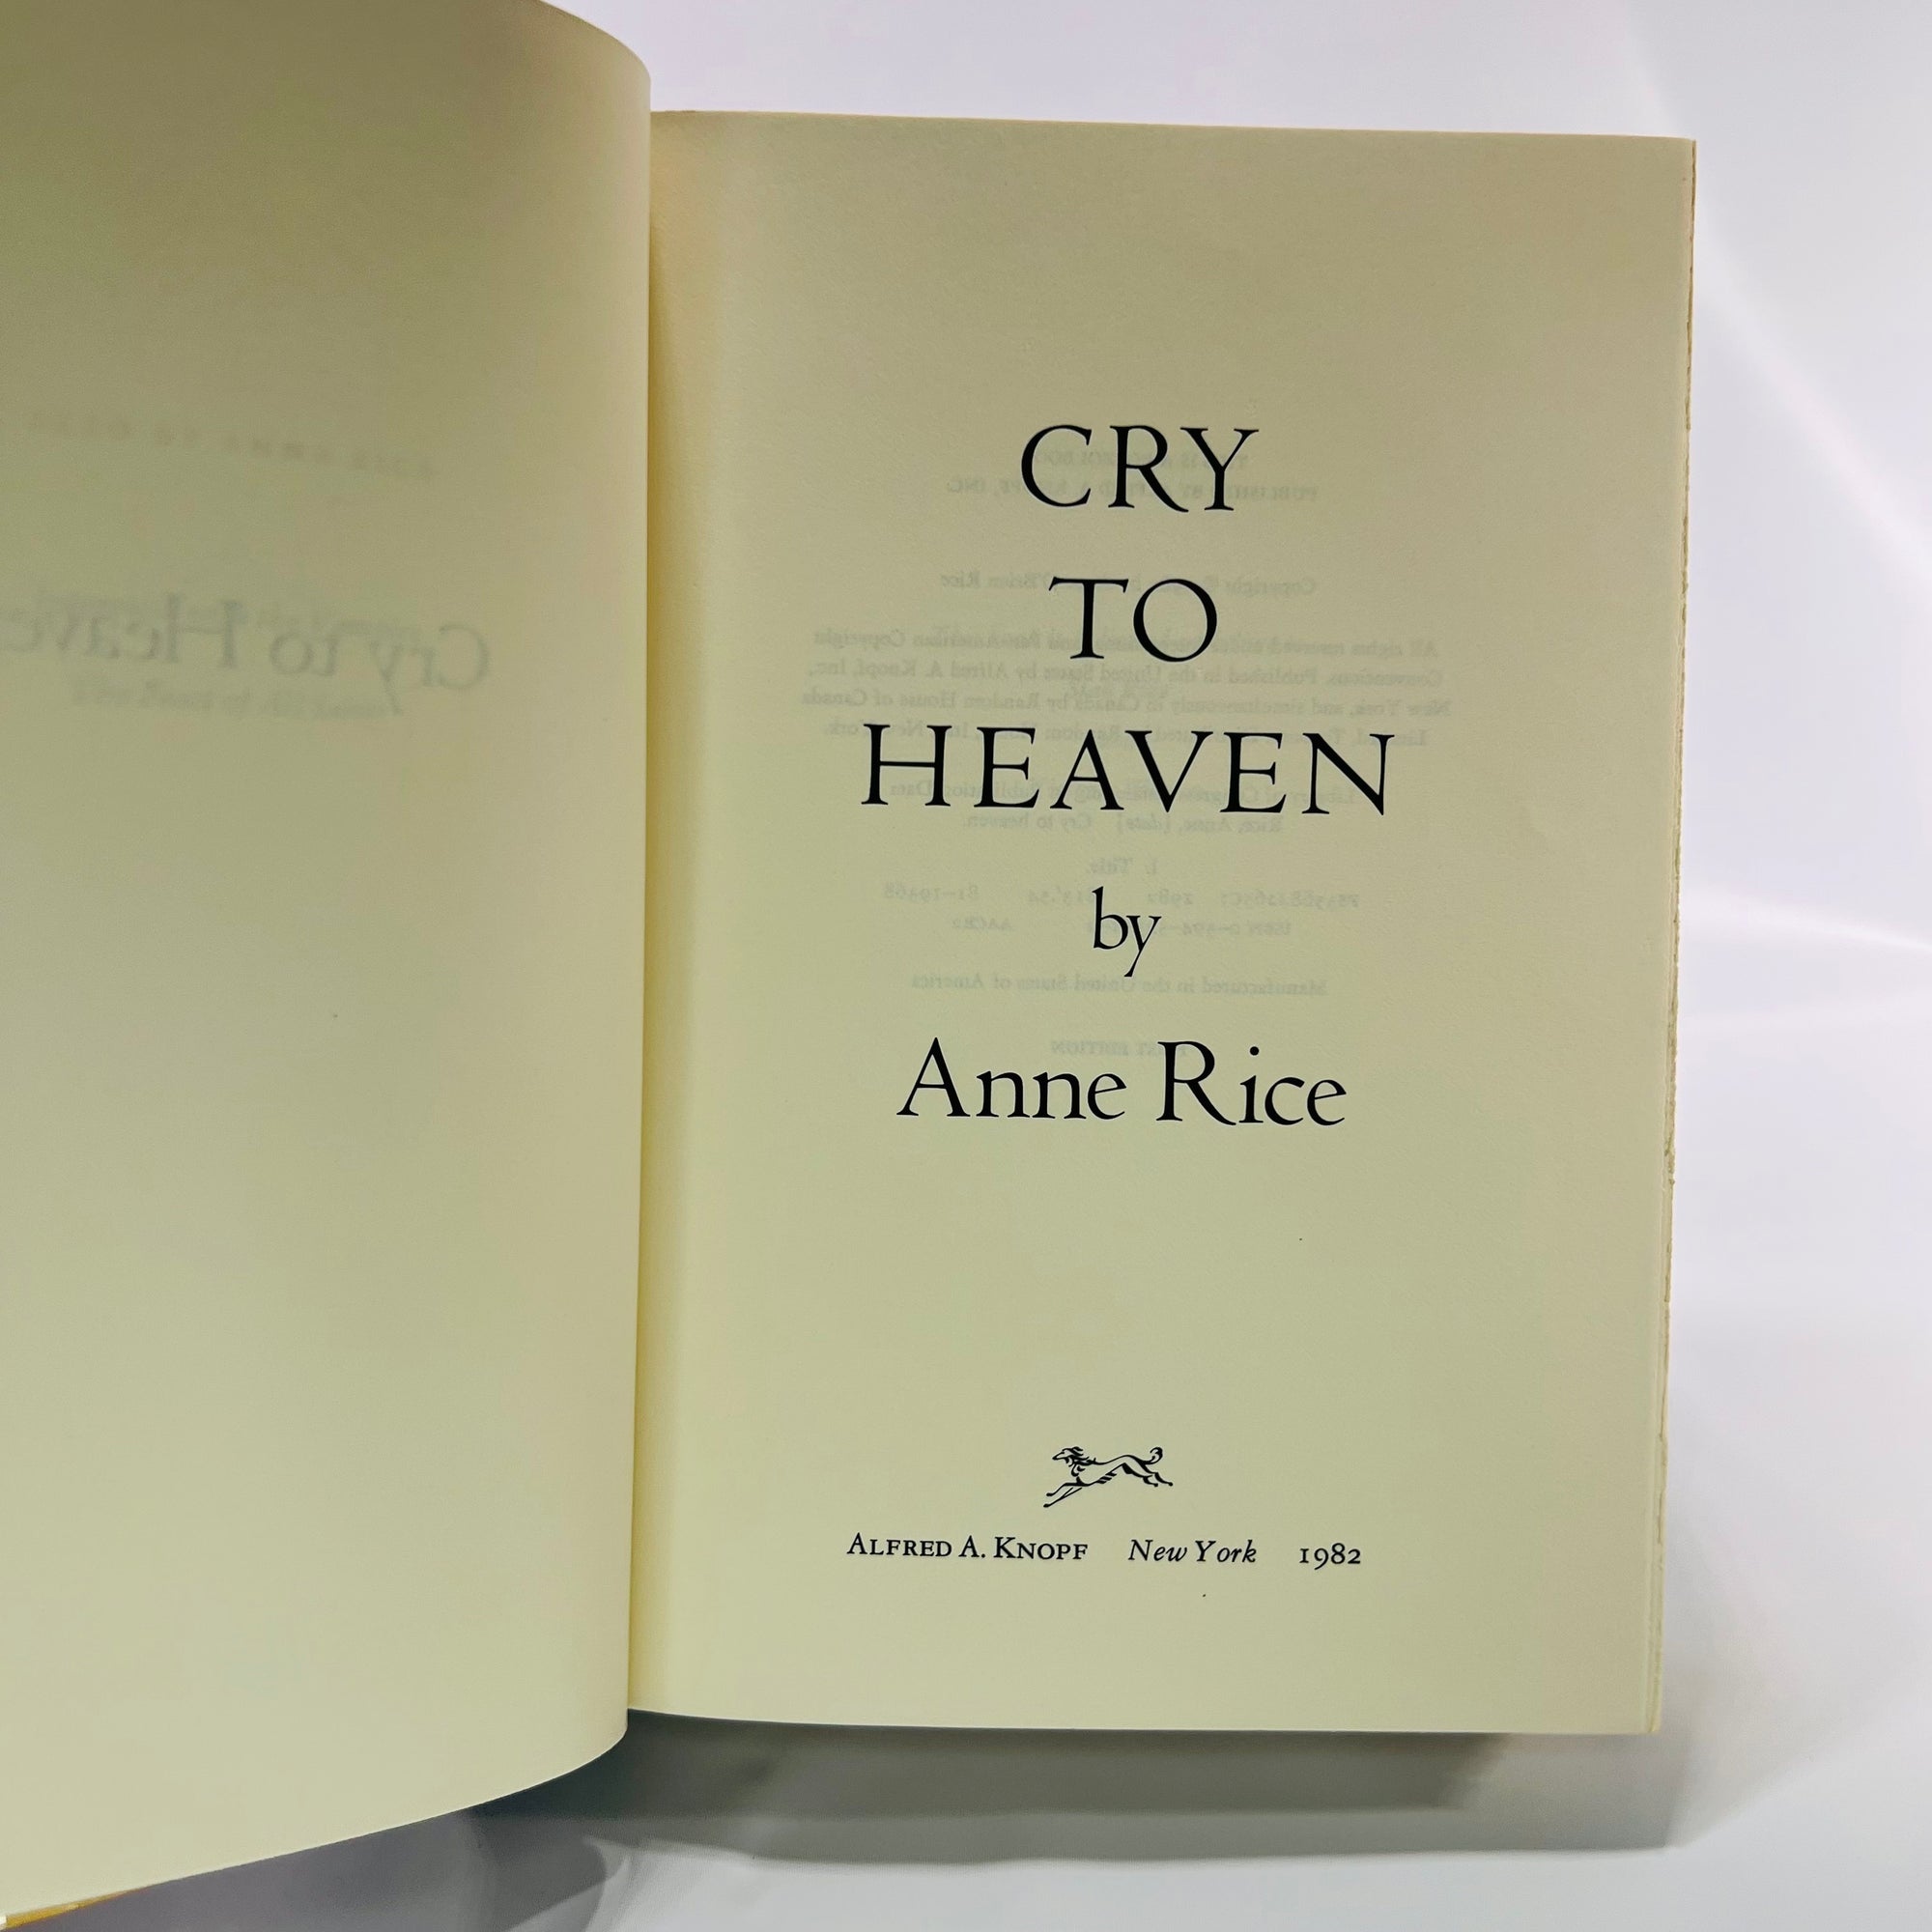 Cry to Heaven a novel by Anne Rice 1982 First Edition Alfred A. Knopf